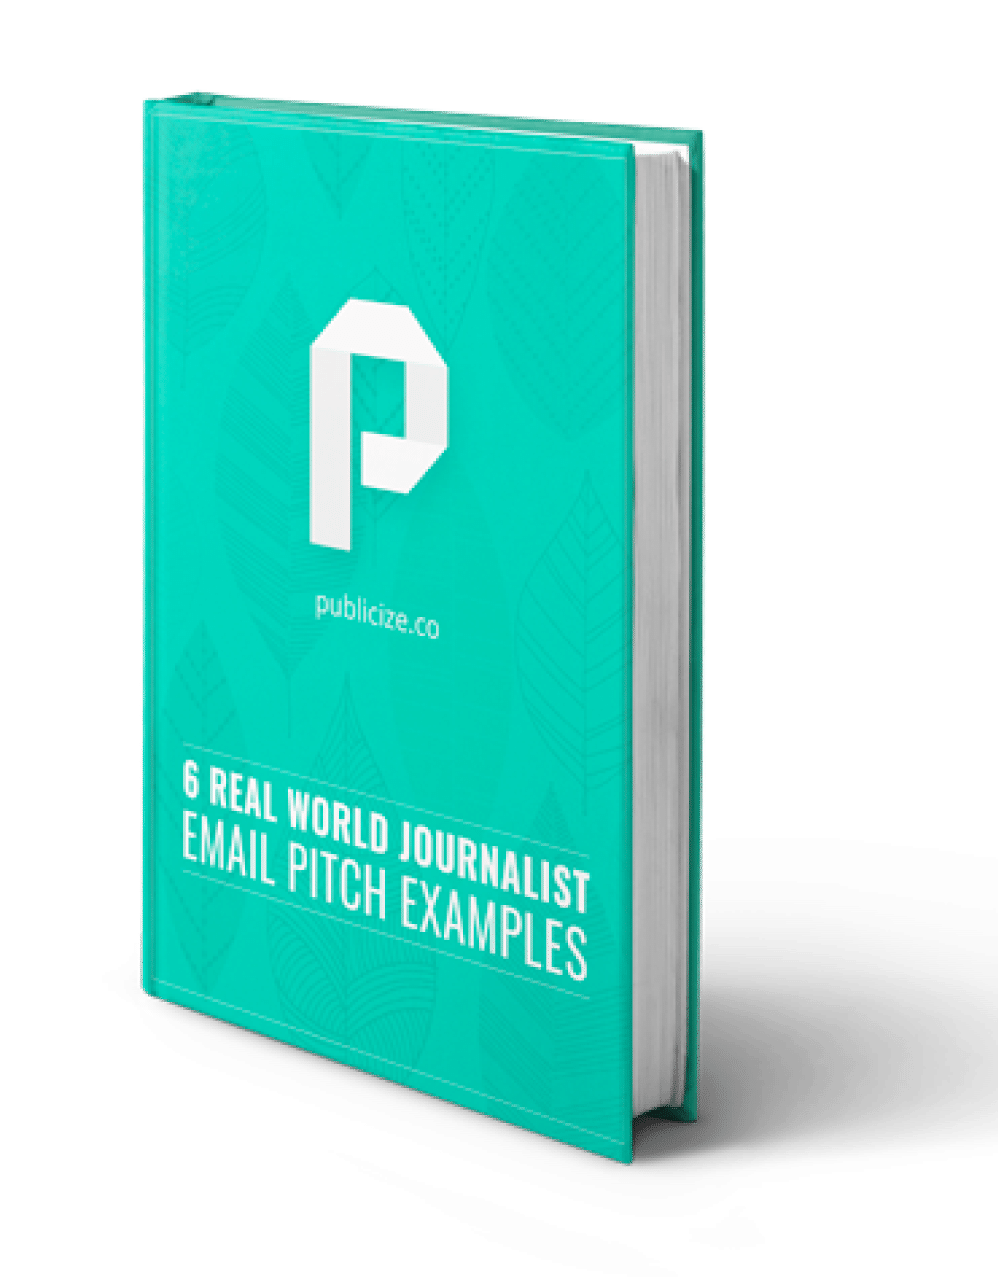 6 Real World Journalist Email Pitch Examples book